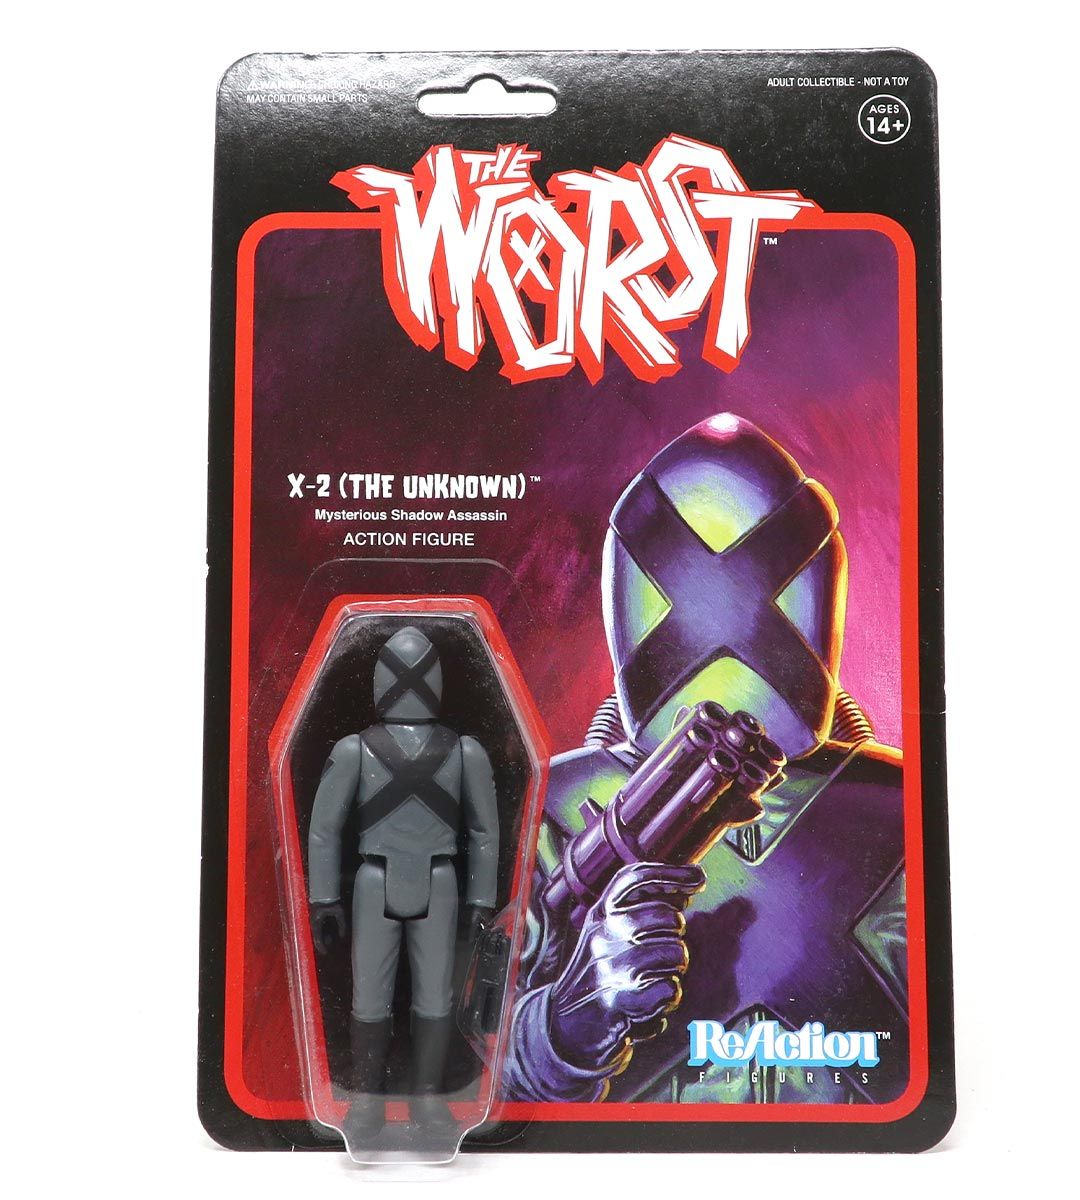 X-2 (the unknown) - The Worst - ReAction figure